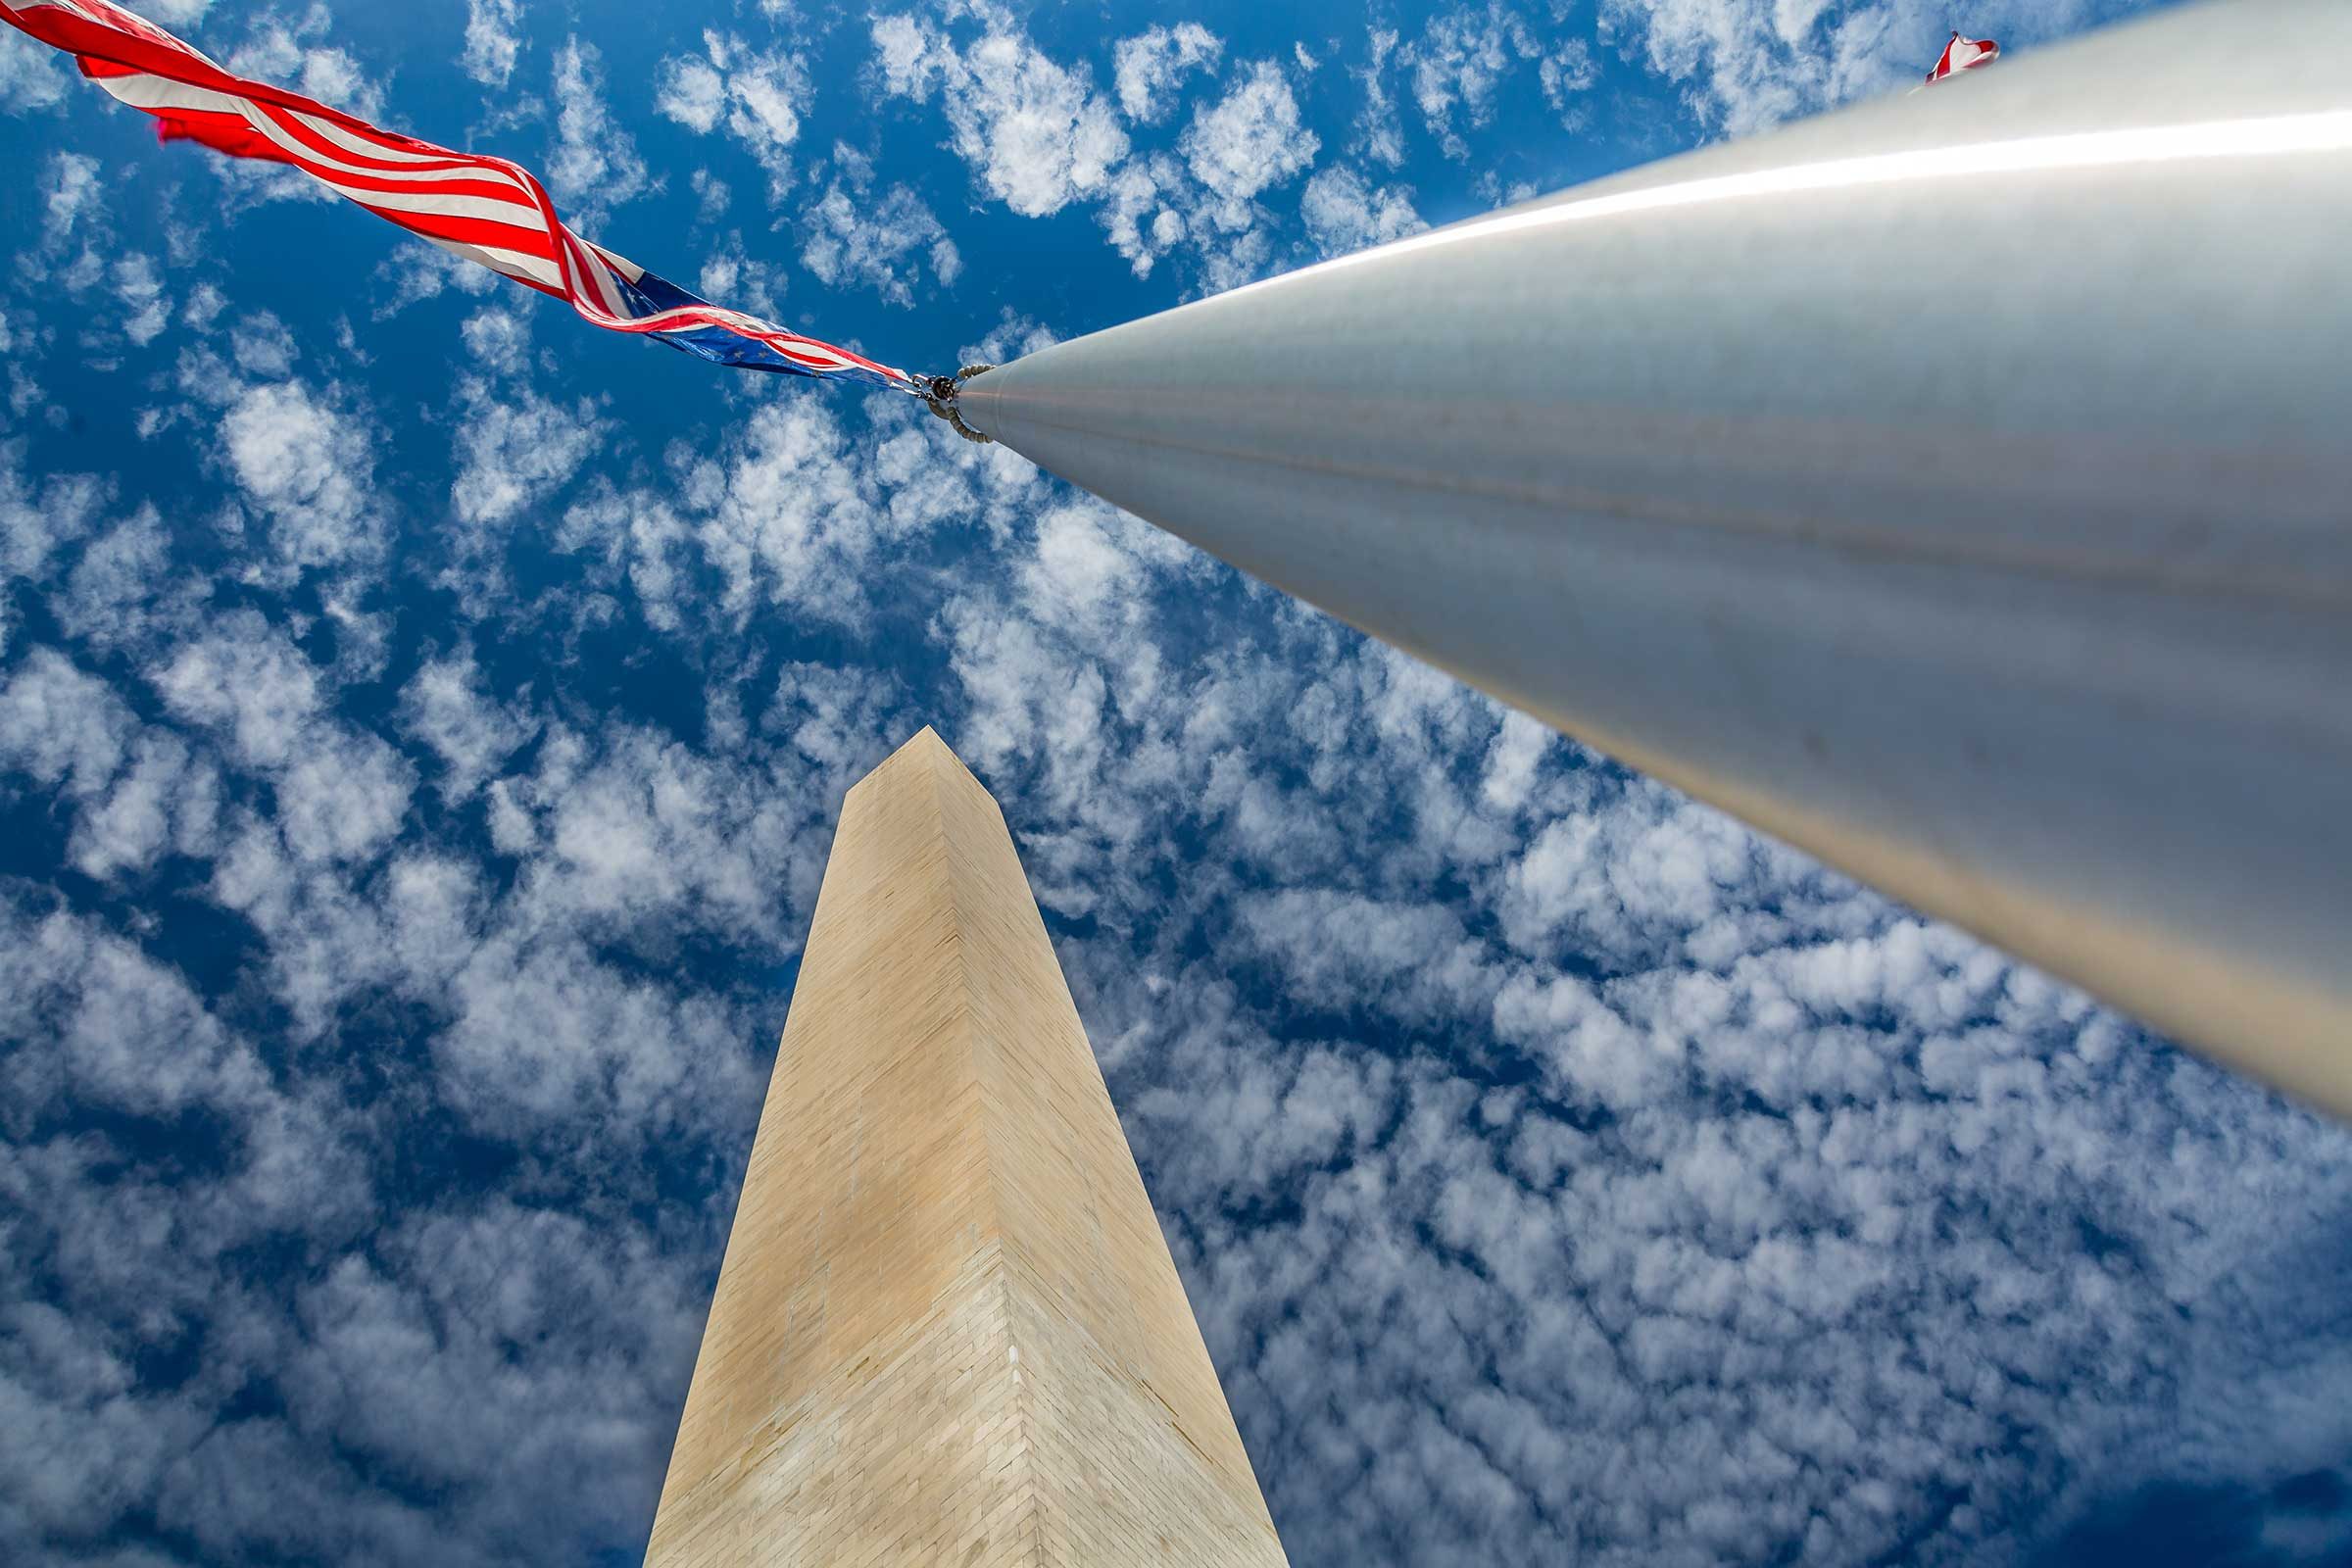 the washington monument in washington, dc, as seen from the base of one of the flag poles. an american flag waves below a blue sky dotted with fluffly clouds